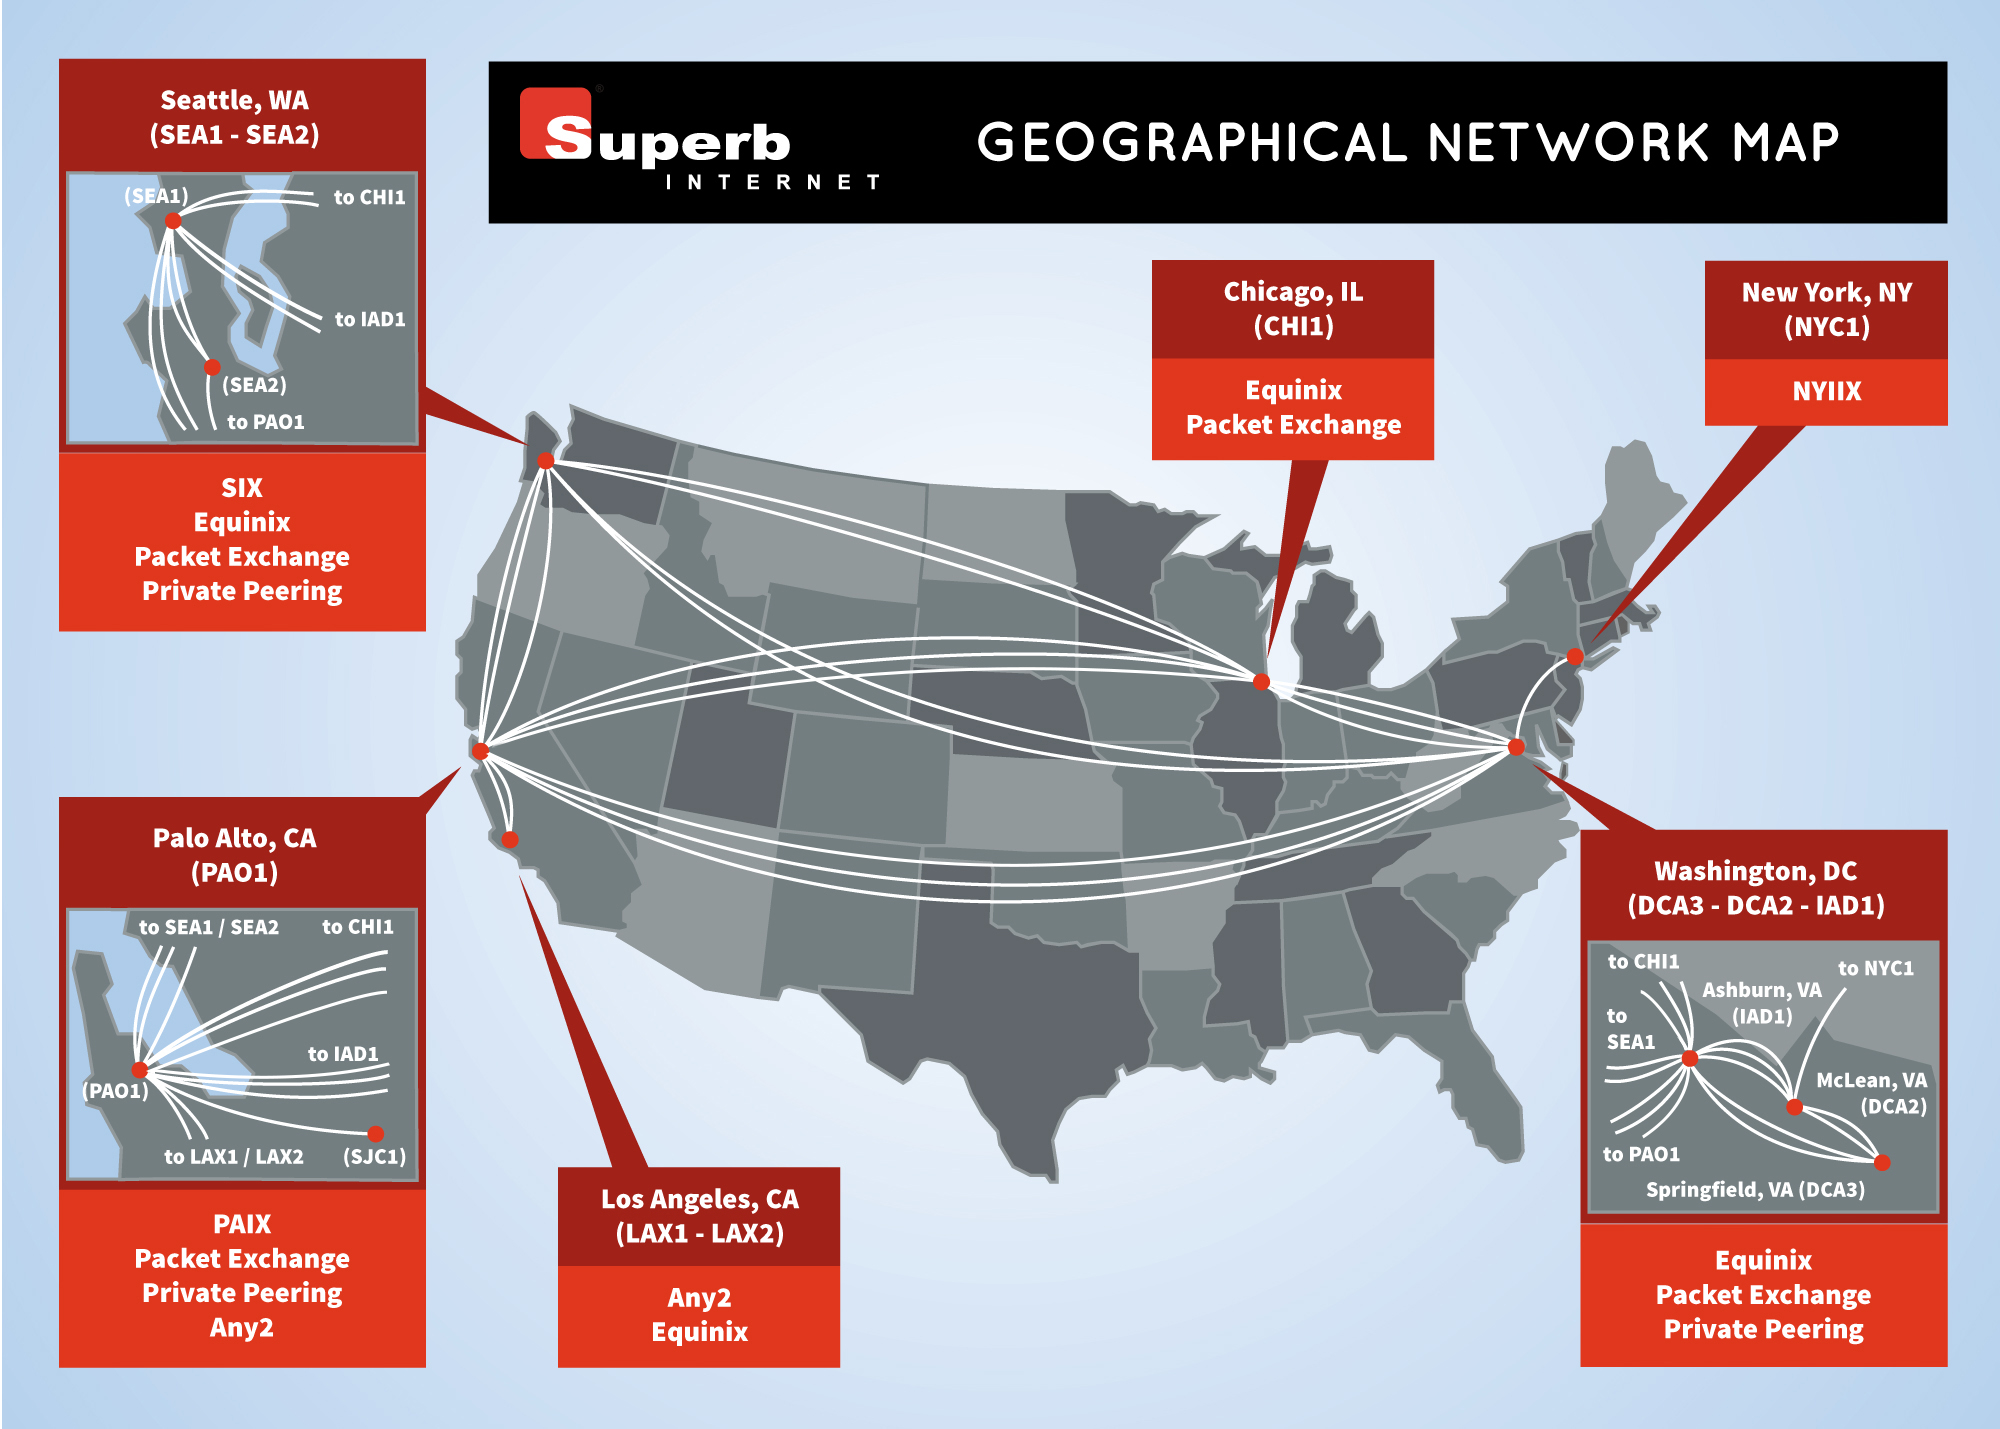 Network Geographical Map - Winter, 2016